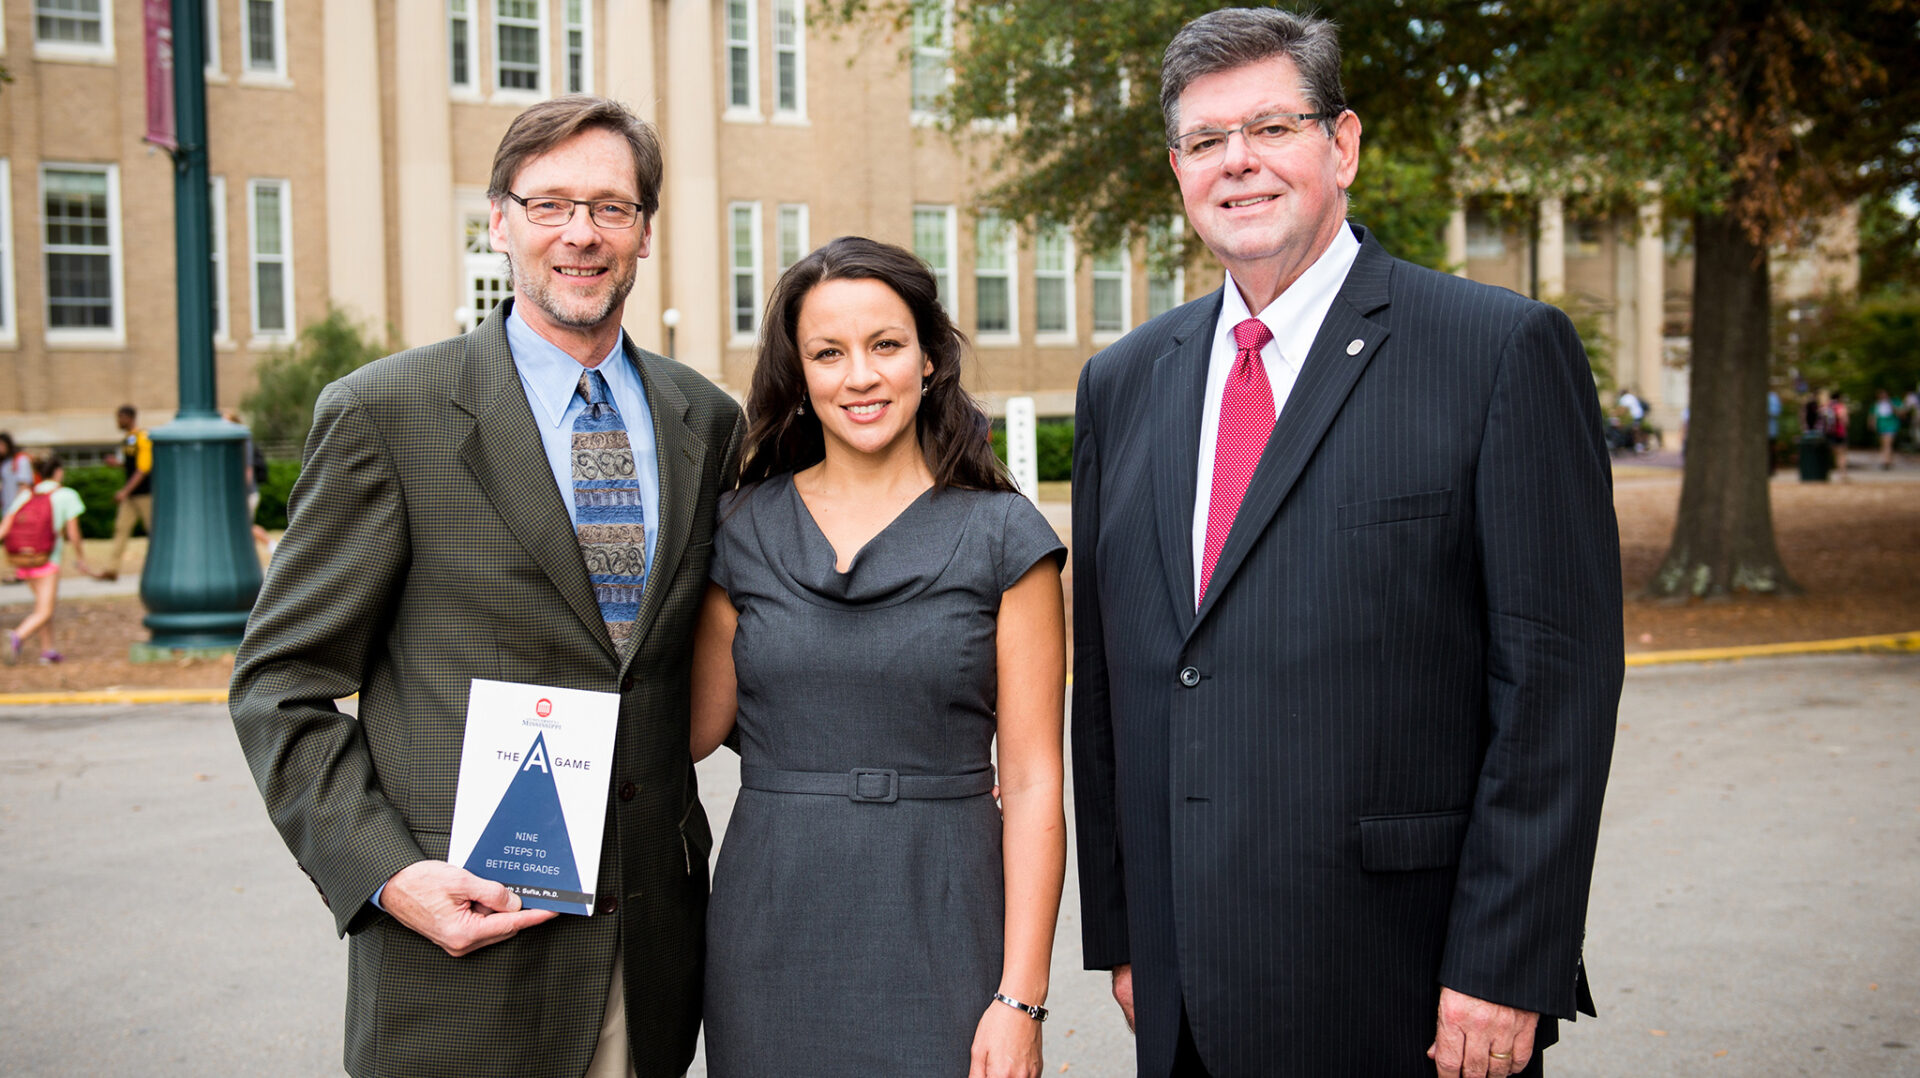 UM professor Ken Sufka (left) and his wife, Stevi Self, have established a scholarship from royalties received from the publication of Sufka's book. UM Provost Morris Stocks (right) was instrumental in making the book required reading for all entering students. Photo by Bill Dabney